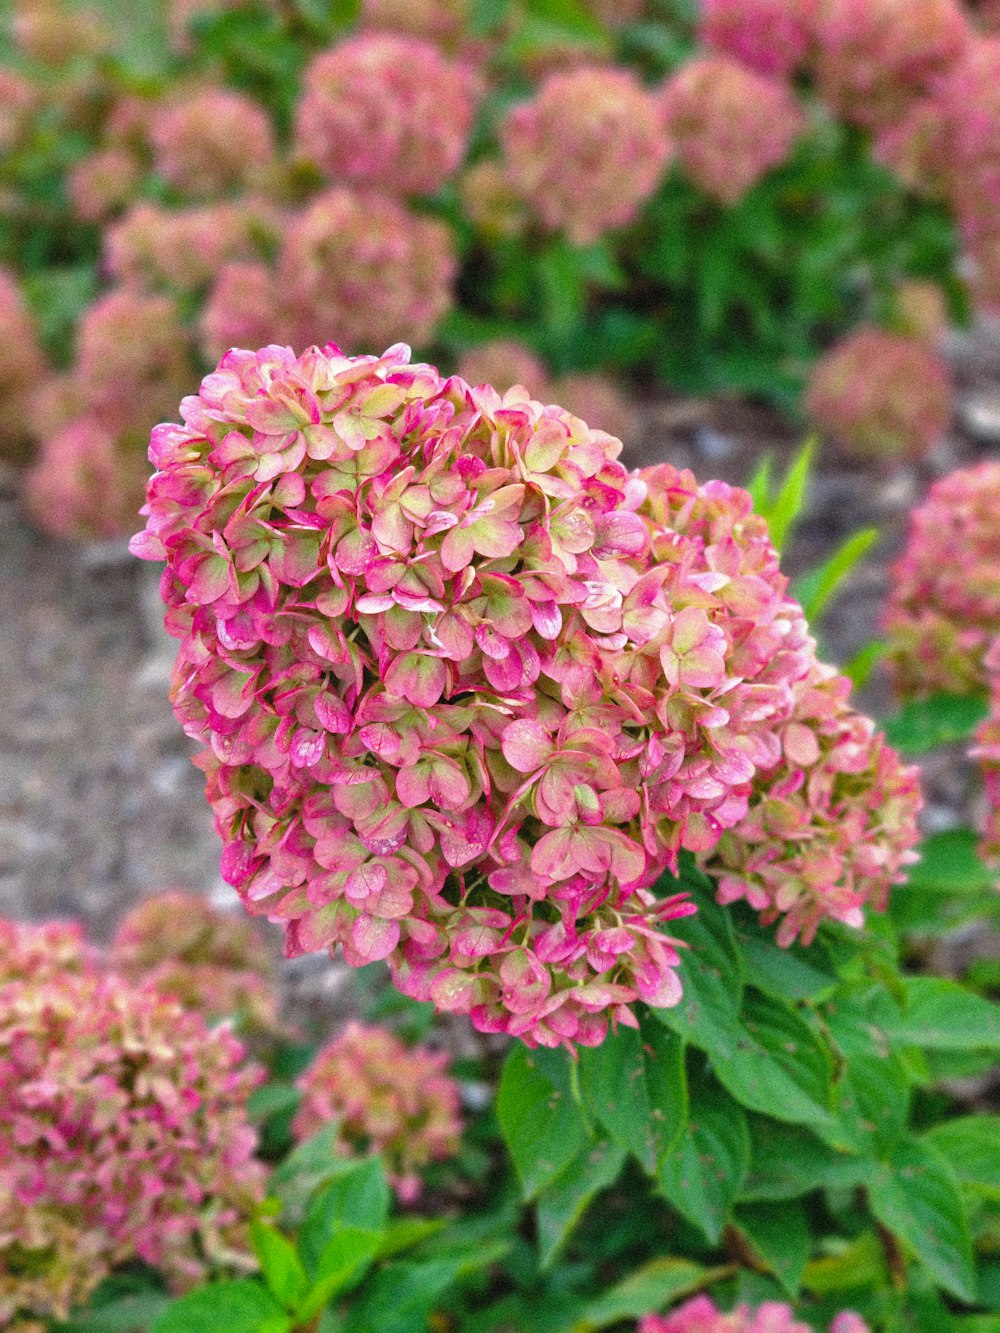 a cluster of pink flowers in a garden